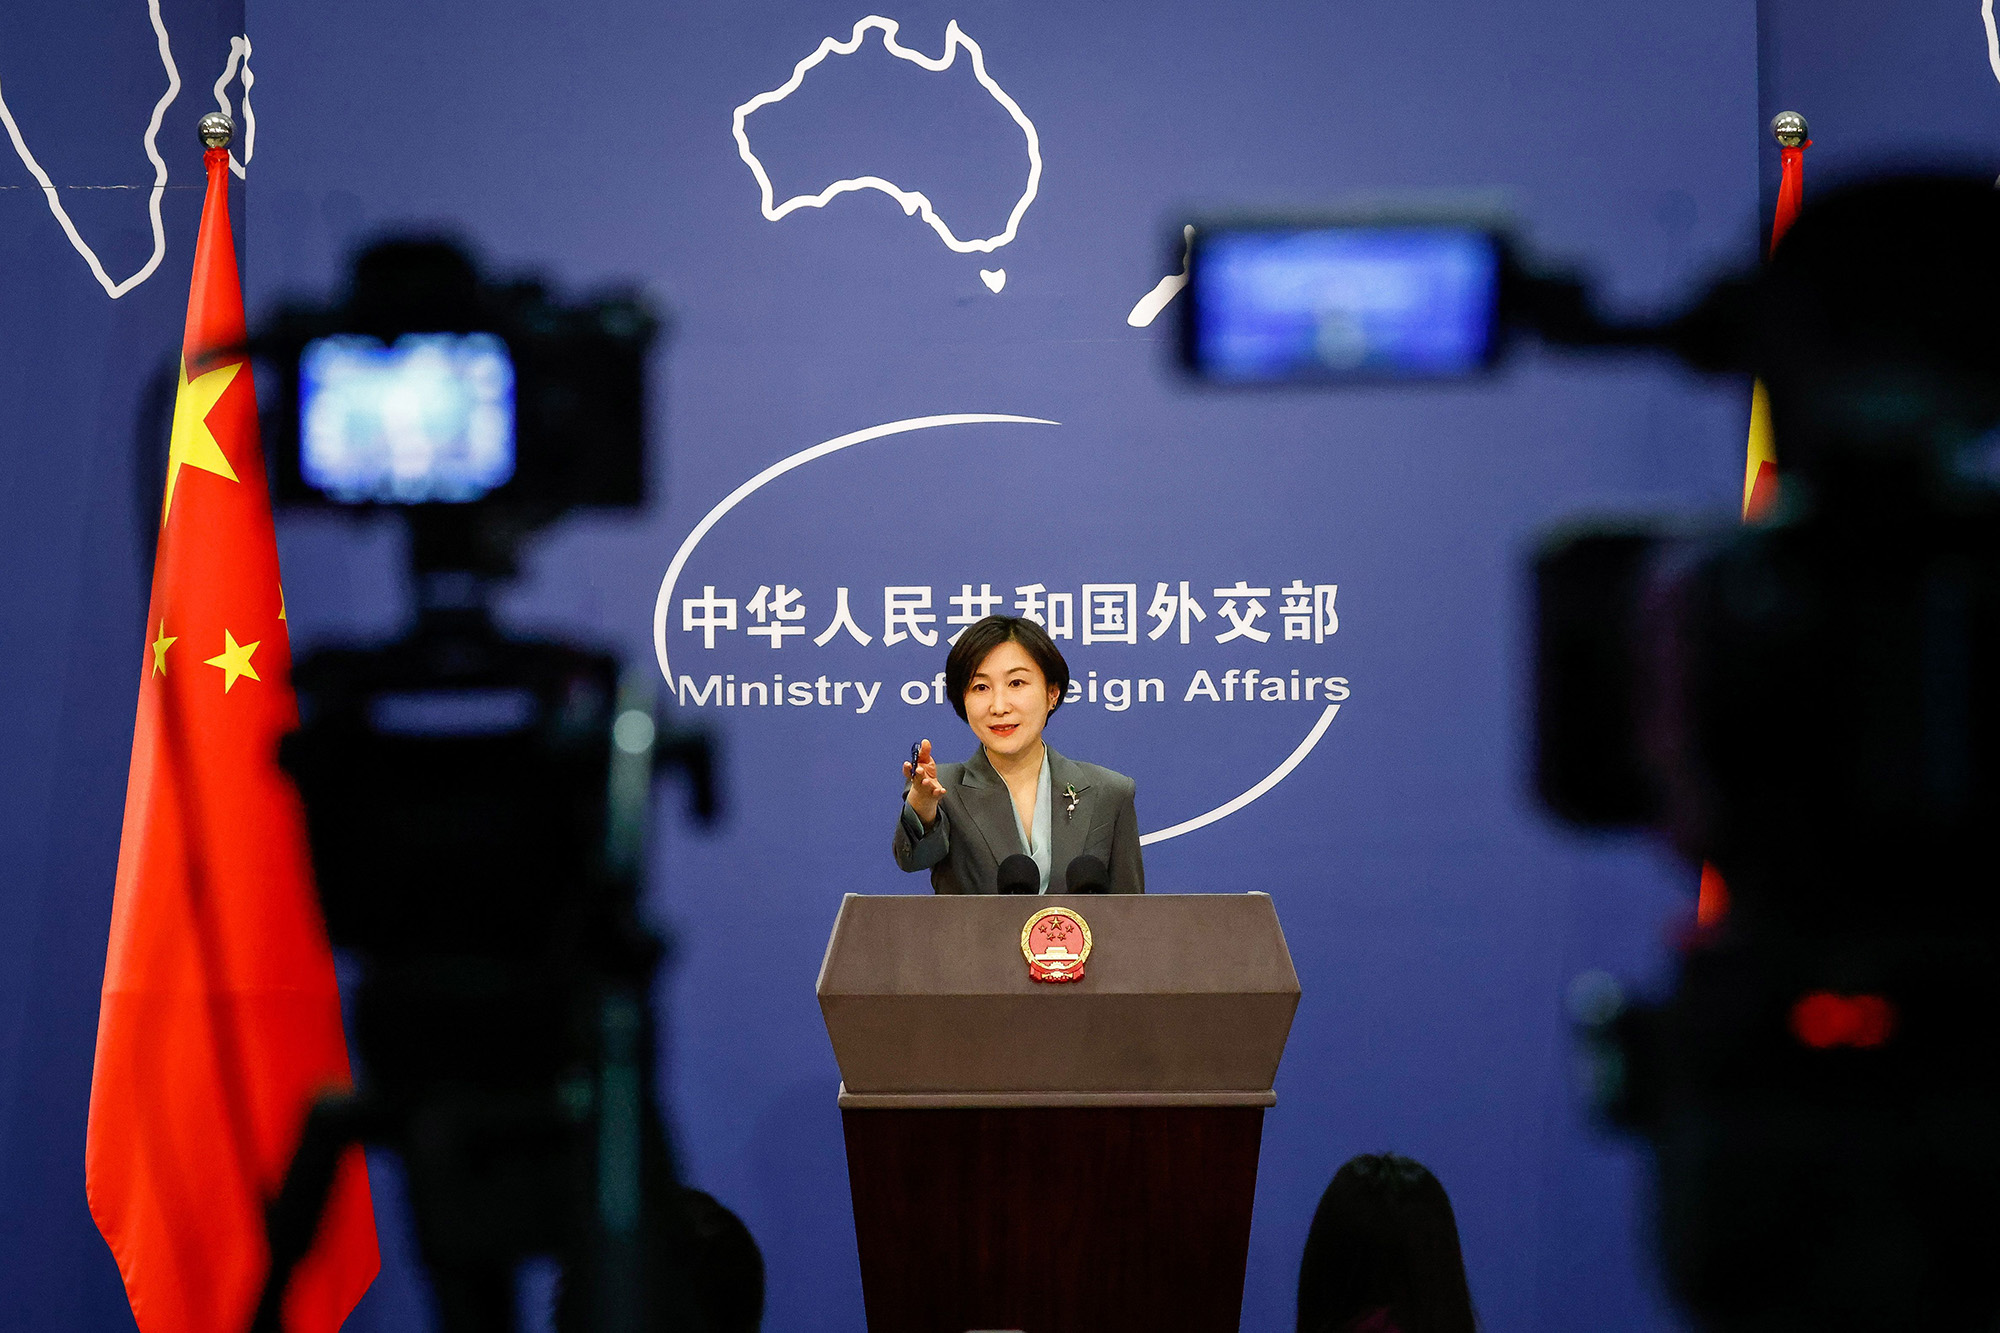 China's Foreign Ministry spokesperson Mao Ning gestures during a press conference at the Ministry of Foreign Affairs in Beijing, China, on February 27.